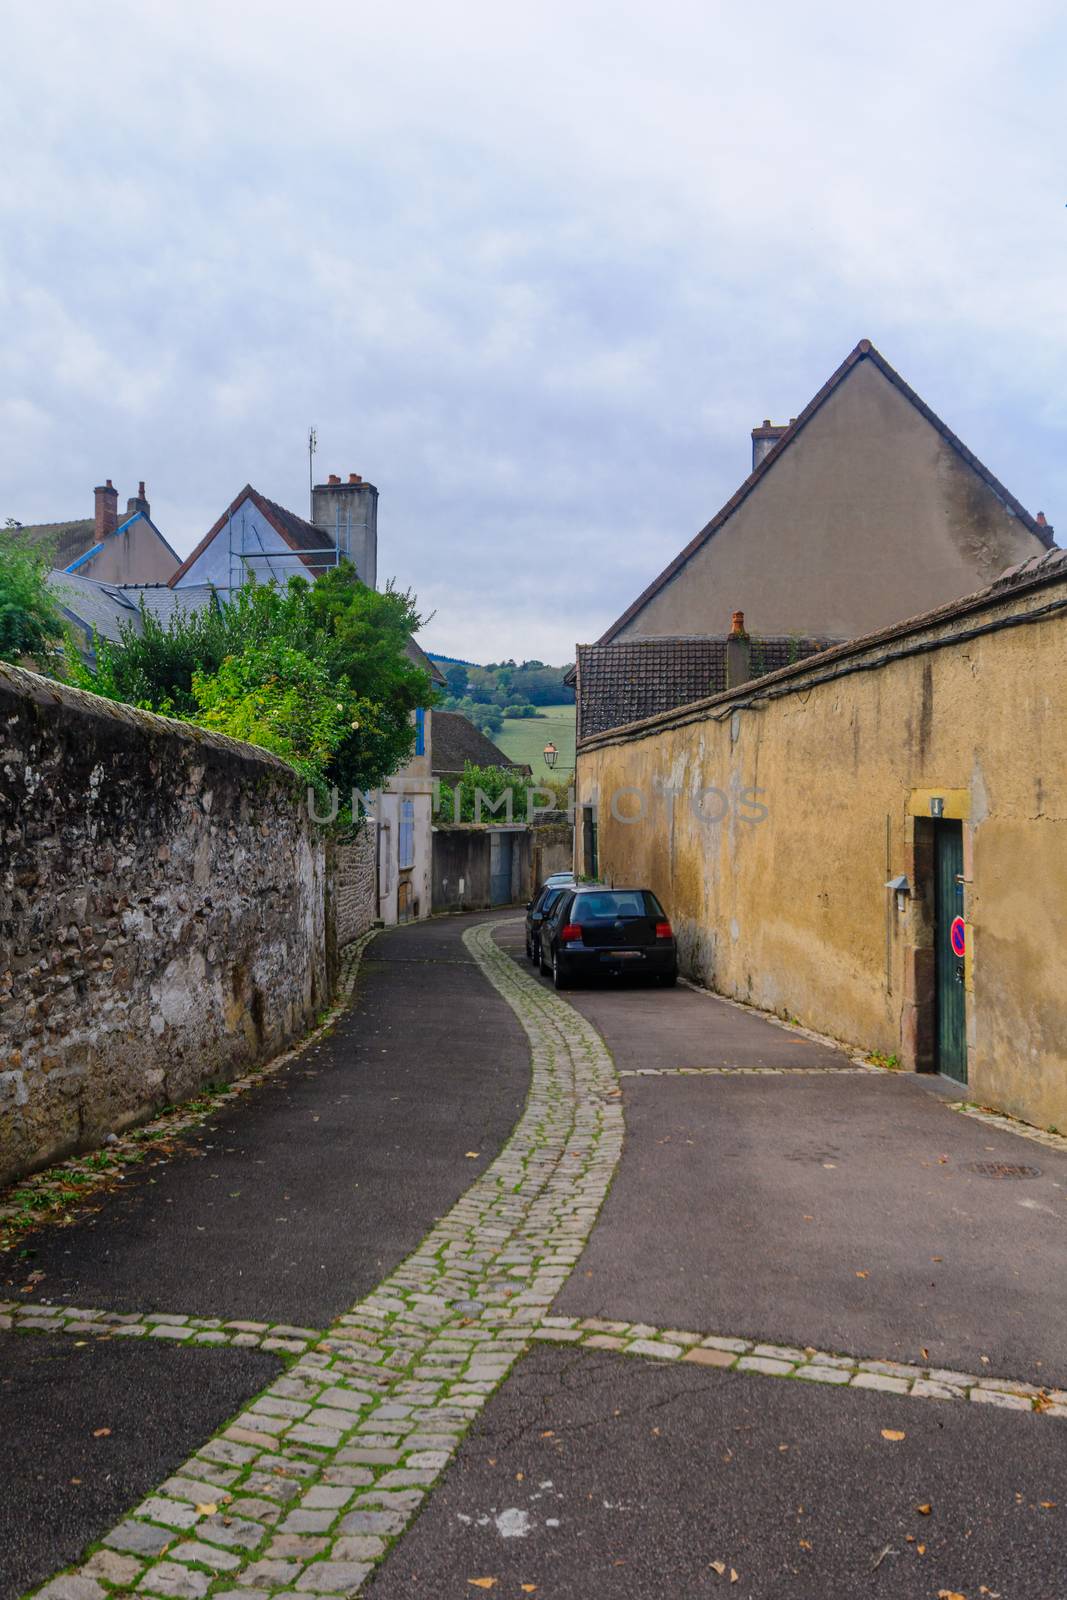 View of a typical street in Autun, Burgundy, France